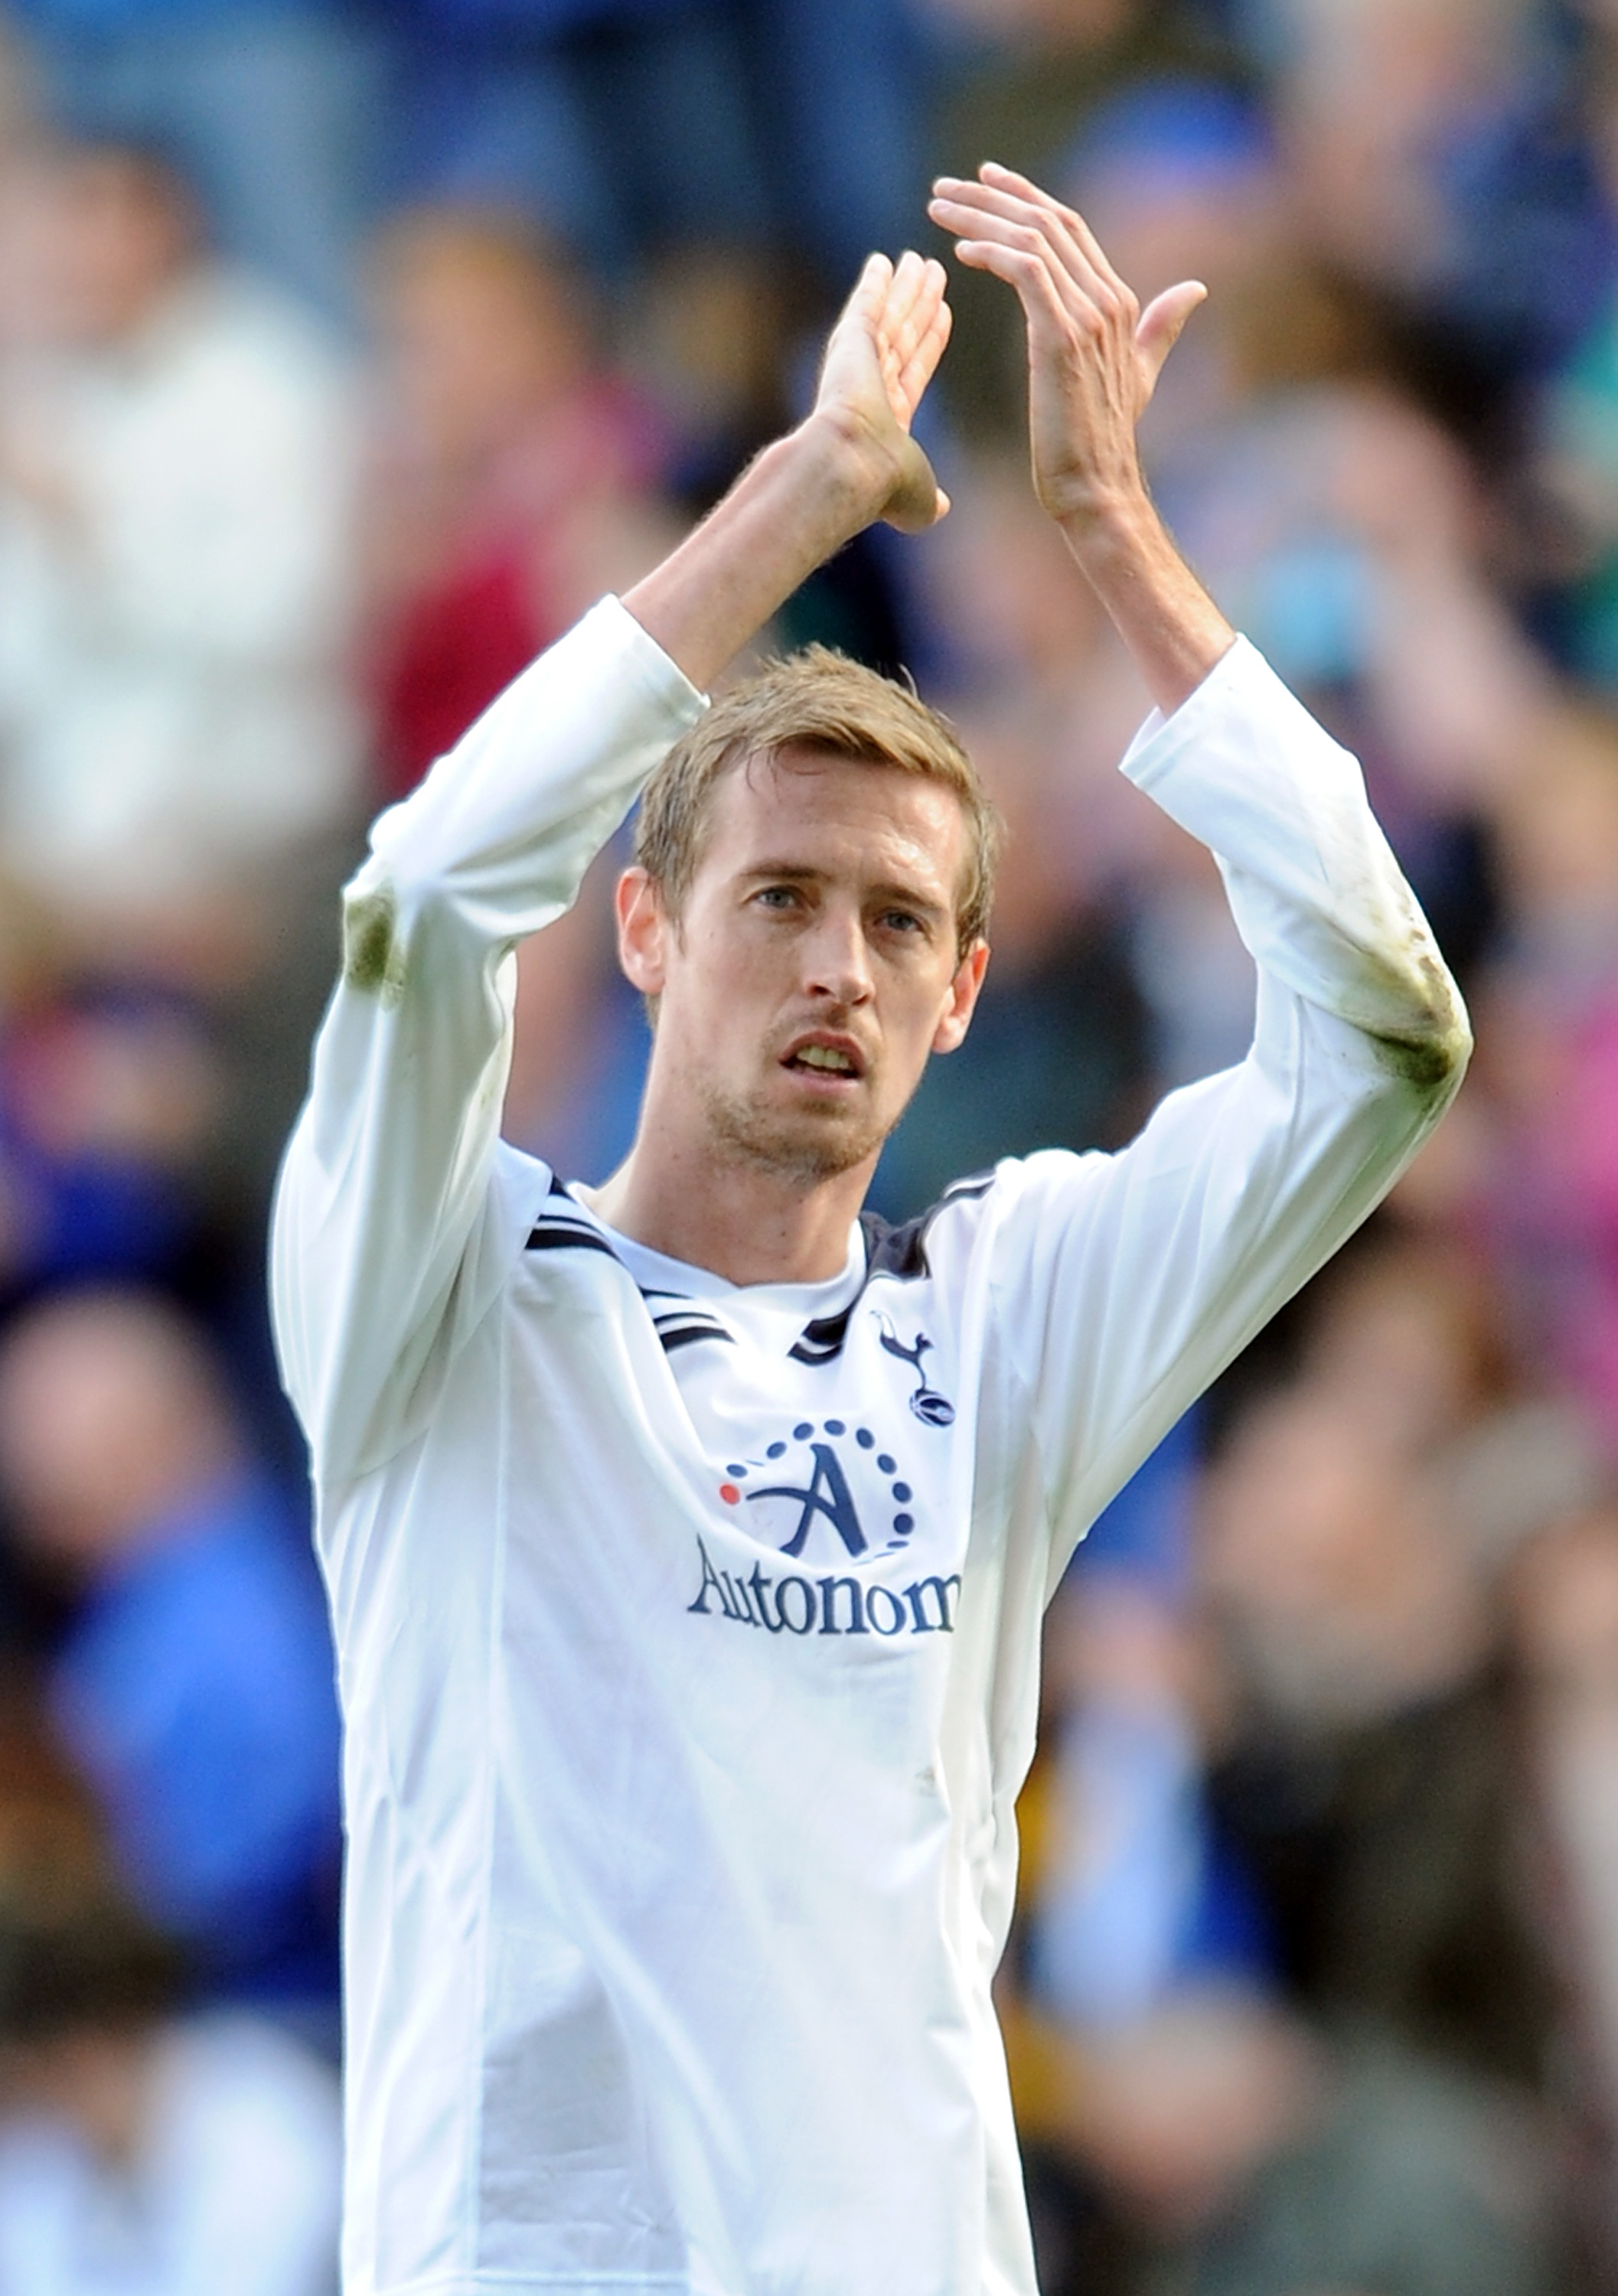 WIGAN, ENGLAND - APRIL 02: Peter Crouch of Tottenham Hotspur applauds the supporters following the Barclays Premier League match between Wigan Athletic and Tottenham Hotspur at DW Stadium on April 2, 2011 in Wigan, England.  (Photo by Chris Brunskill/Gett